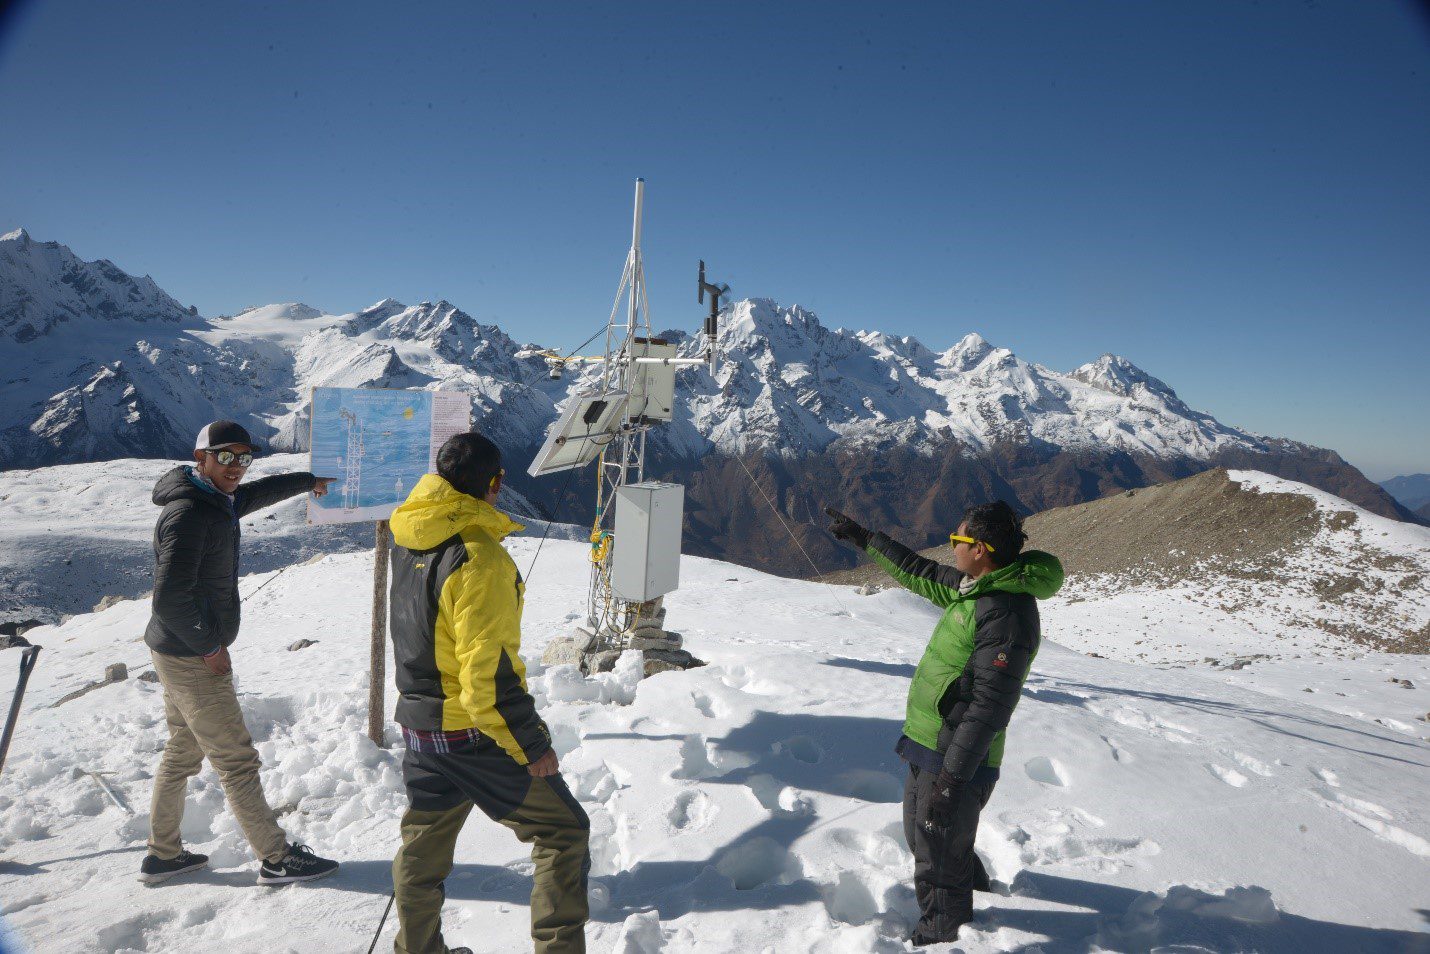 Expedition members pose for a photo after carrying out routine maintenance work on the automatic weather station on Yala Glacier, Langtang Valley